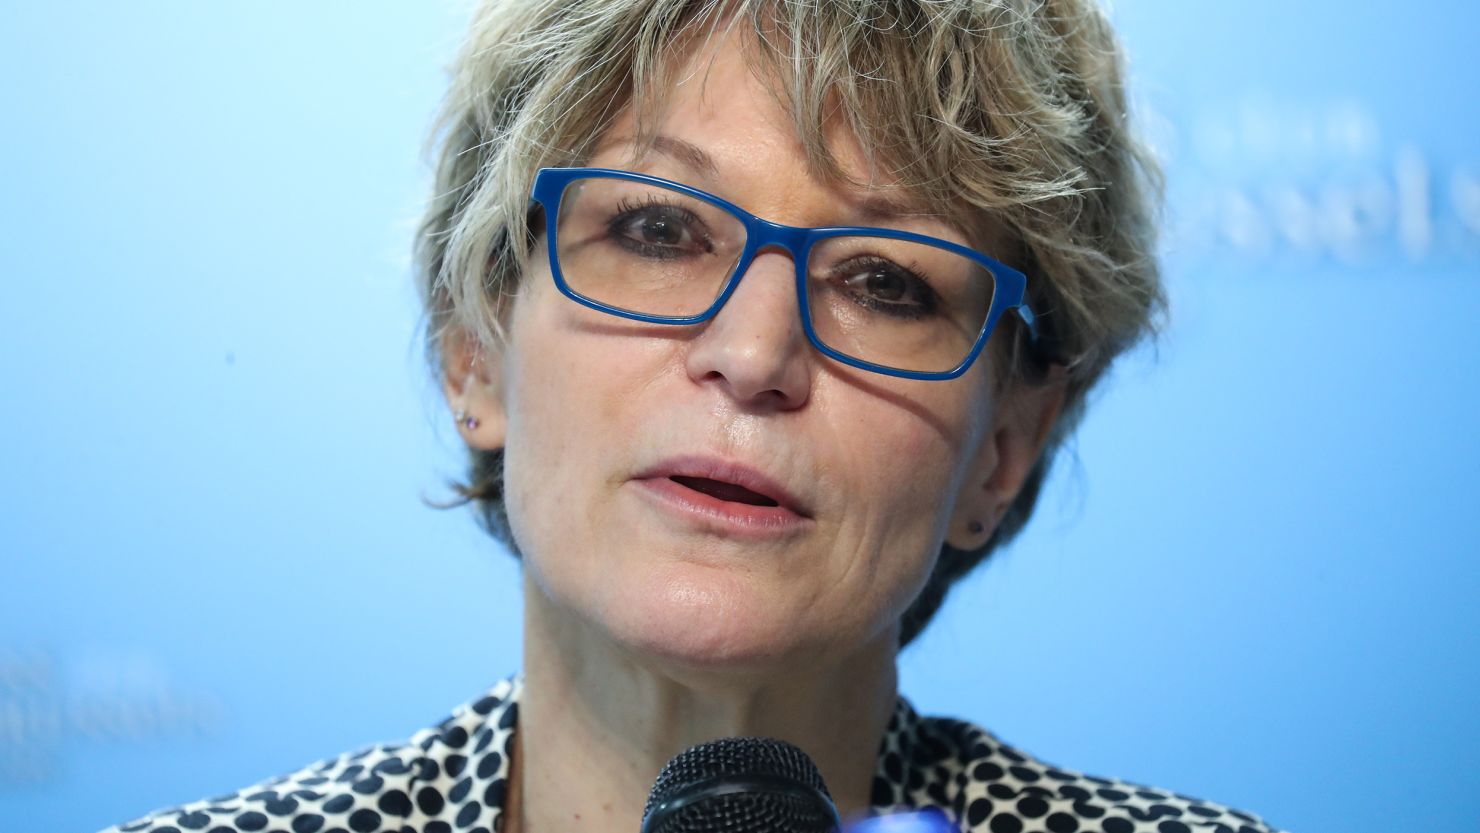 Agnès Callamard published a 2019 report that concluded that there was "credible evidence" that the Saudi Crown Prince and other senior Saudi officials were responsible for Khashoggi's murder.